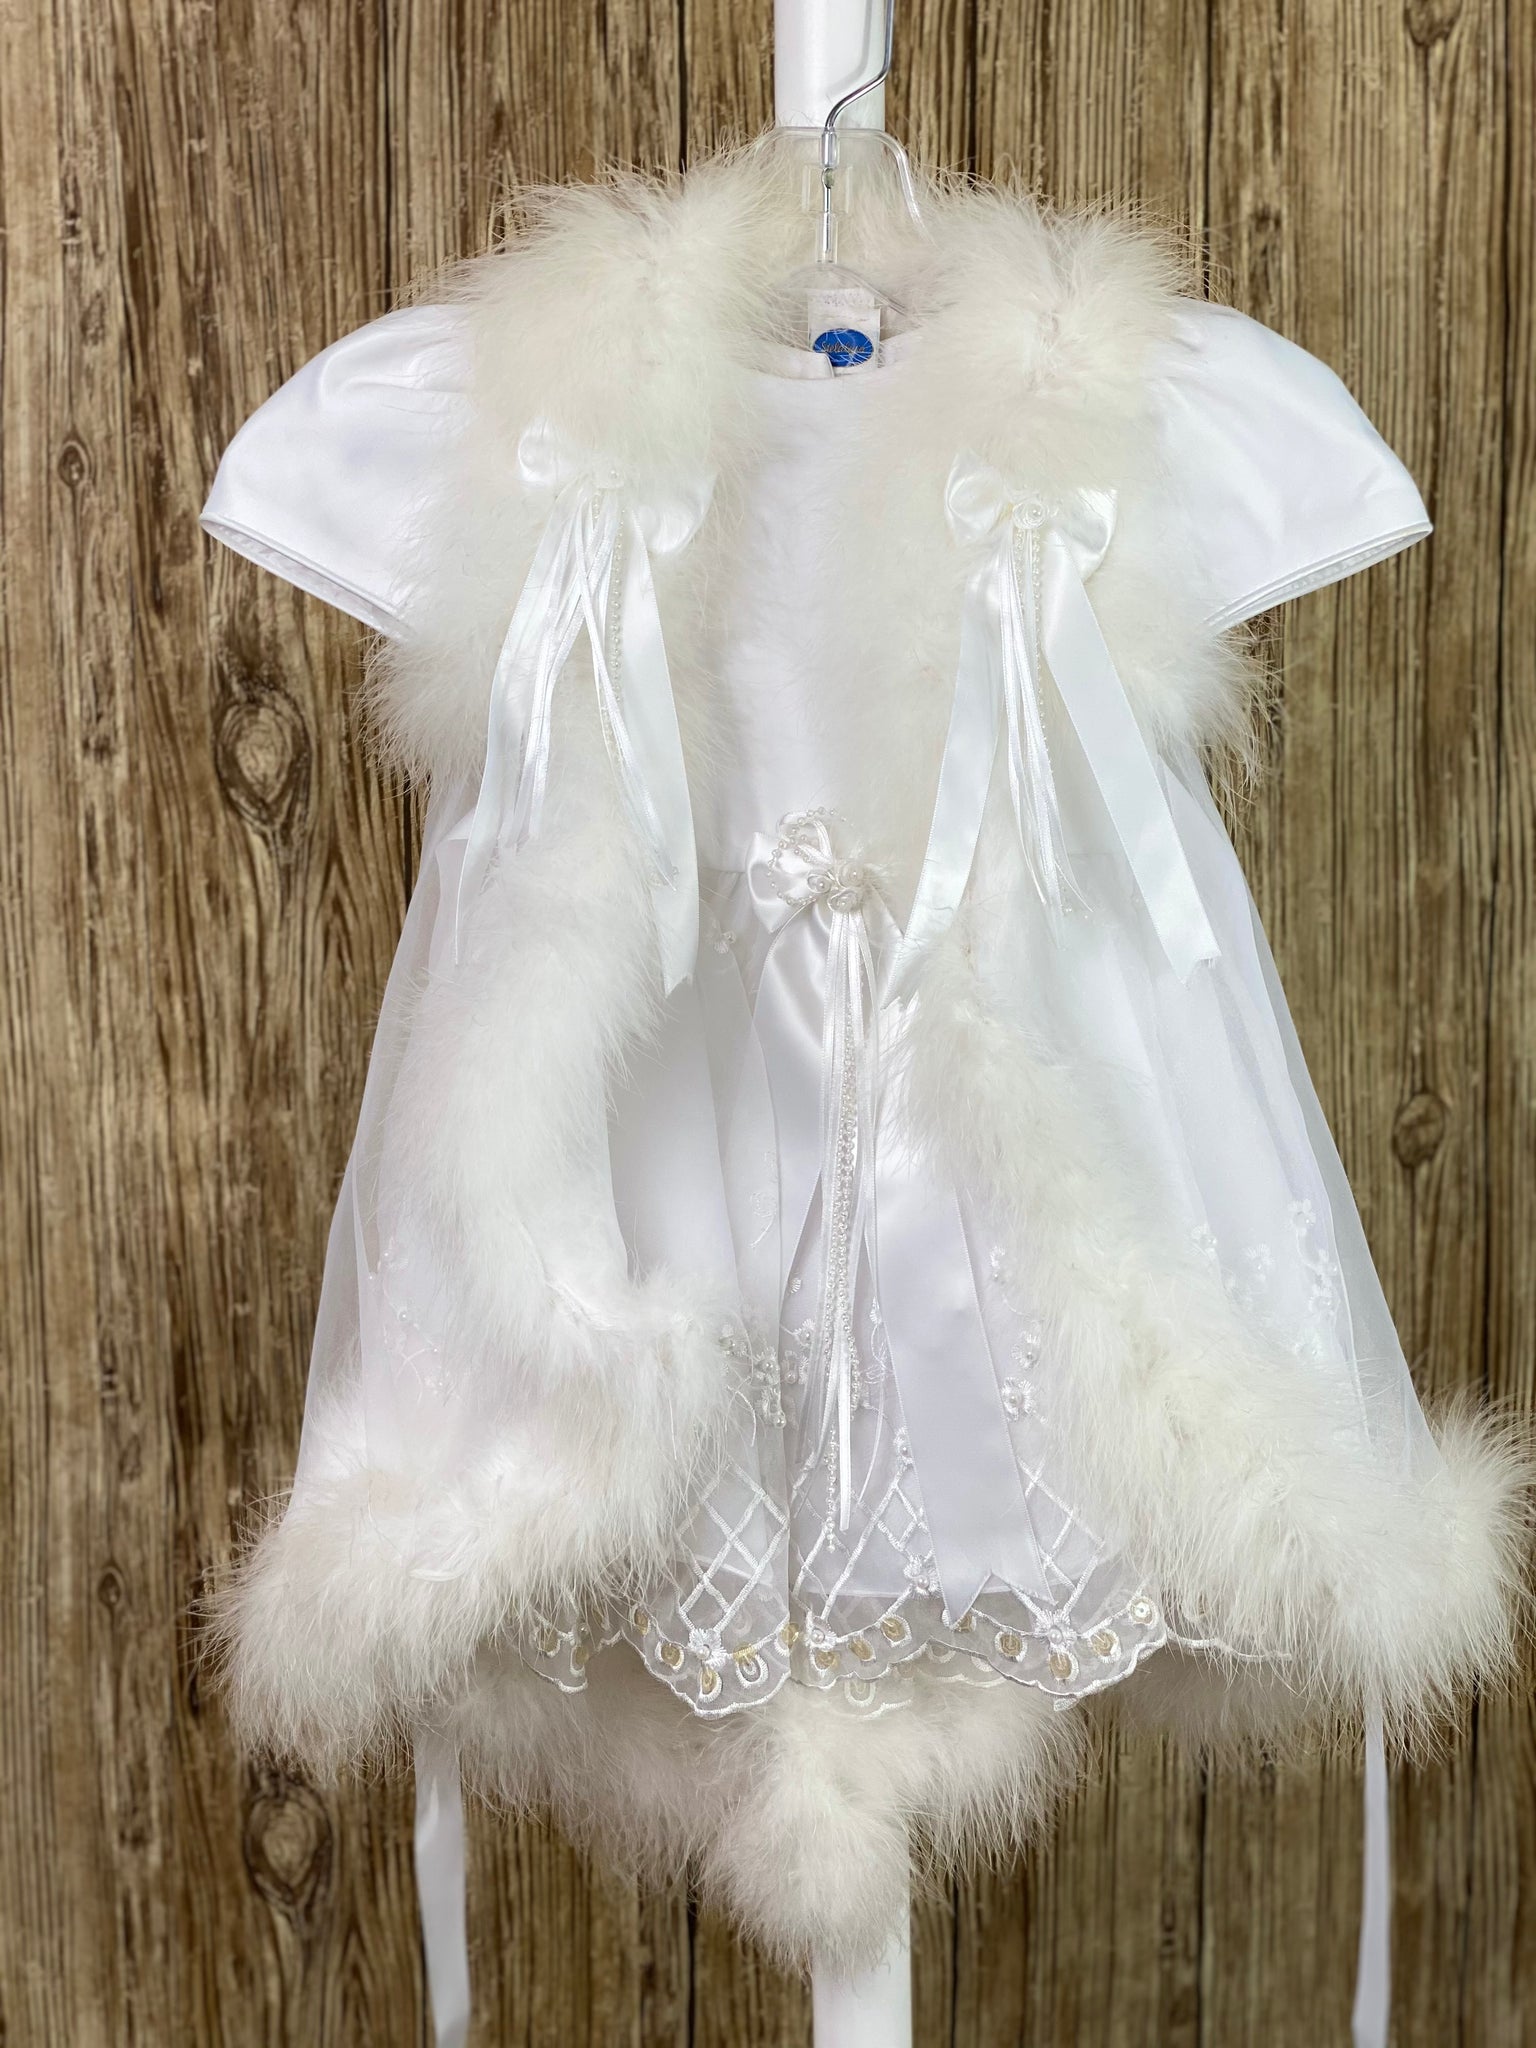 This a beautiful, one-of-a-kind baptism gown.  A lovely gown for a precious child.  White, size 12M Simple satin bodice Satin gathered sleeves Bow in center of bodice Satin skirt with harlequin floral lace Ribbon bow in back Lace vest  Feathered trim on vest Bows on right and left side of vest